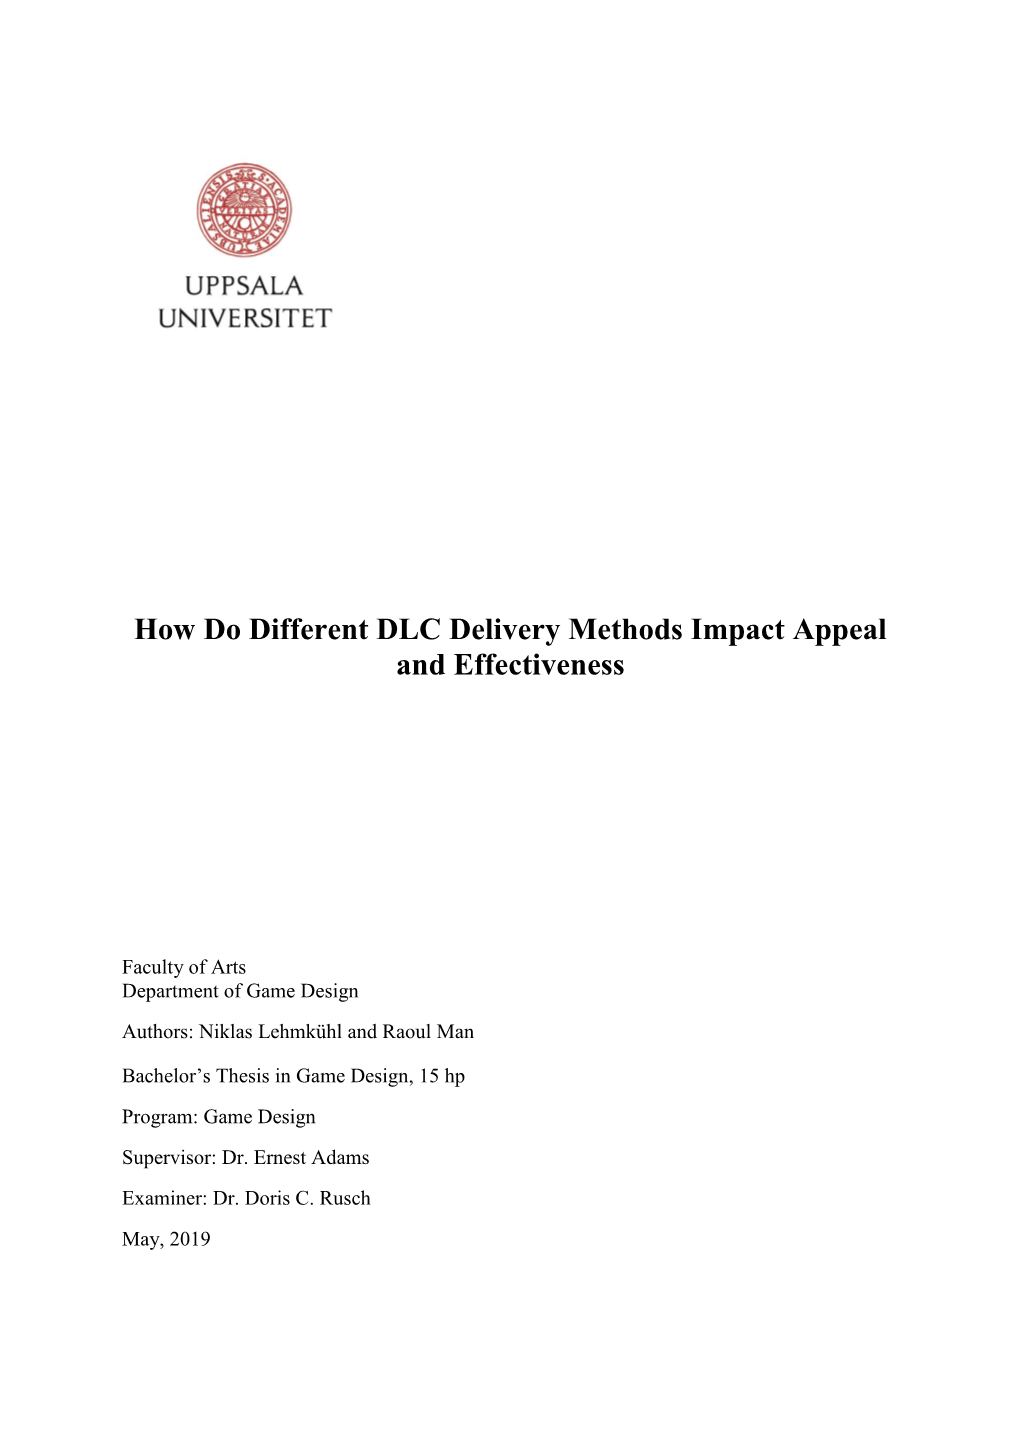 How Do Different DLC Delivery Methods Impact Appeal and Effectiveness